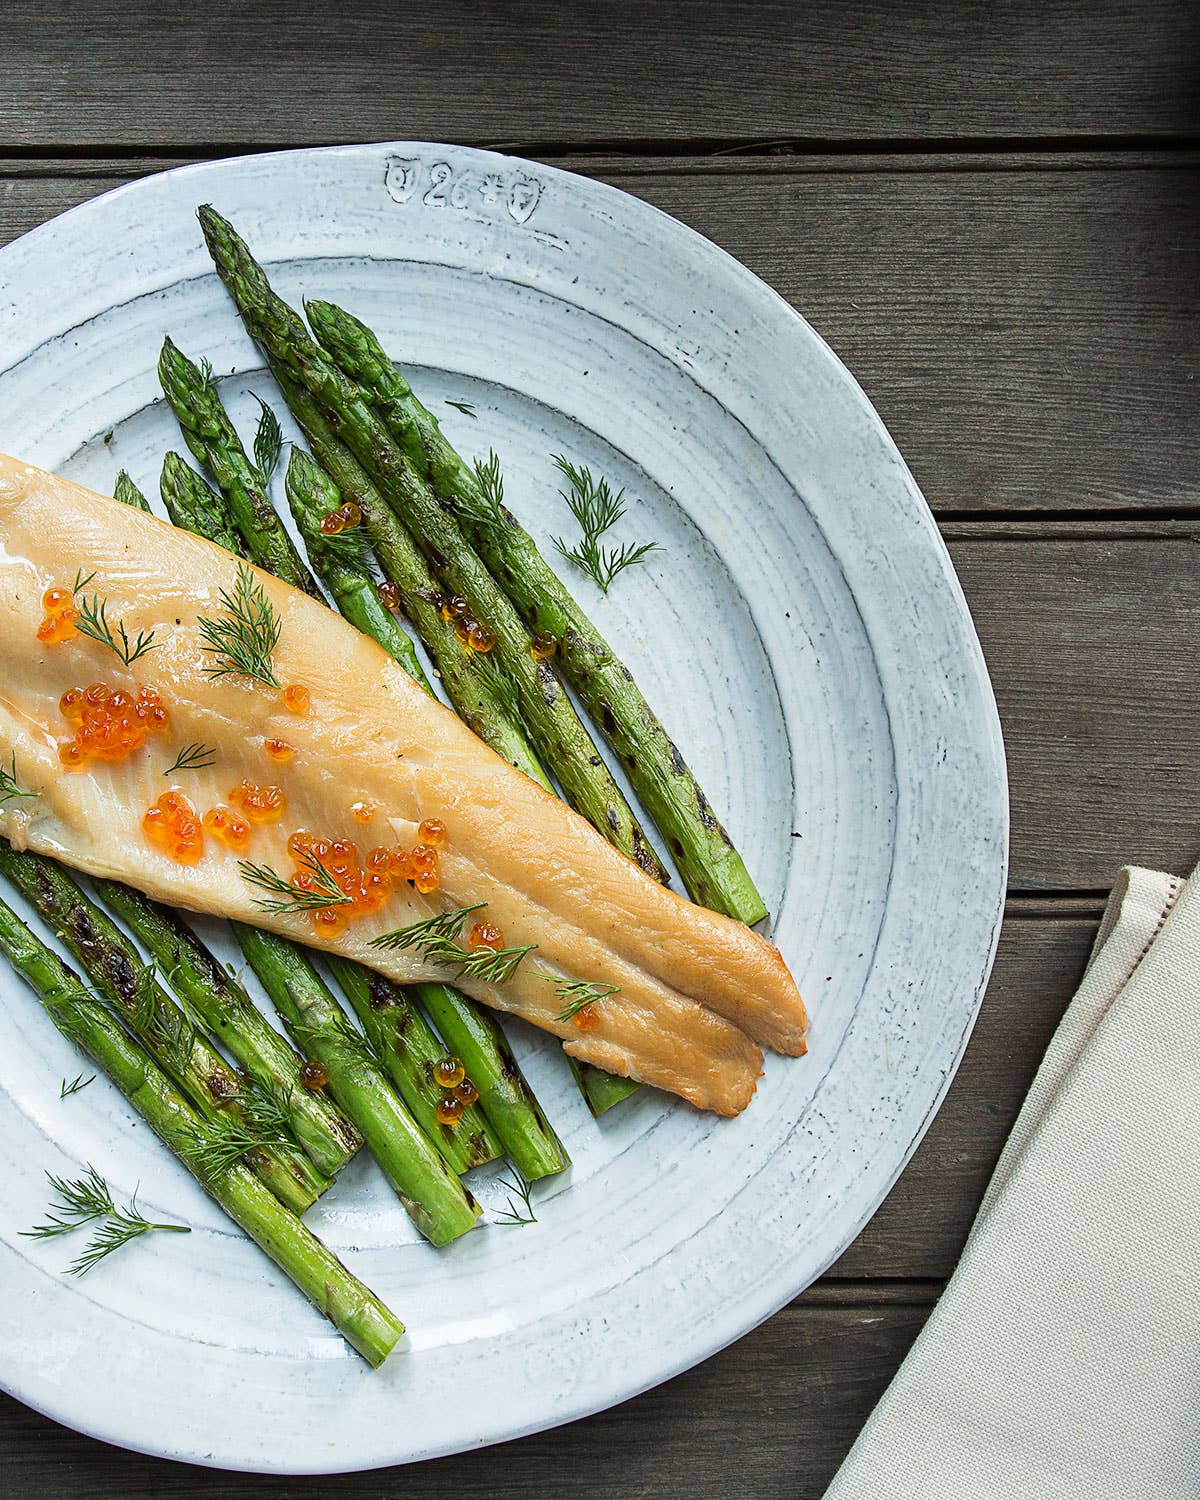 Smoked Trout with Grilled Asparagus-Dill Sauce